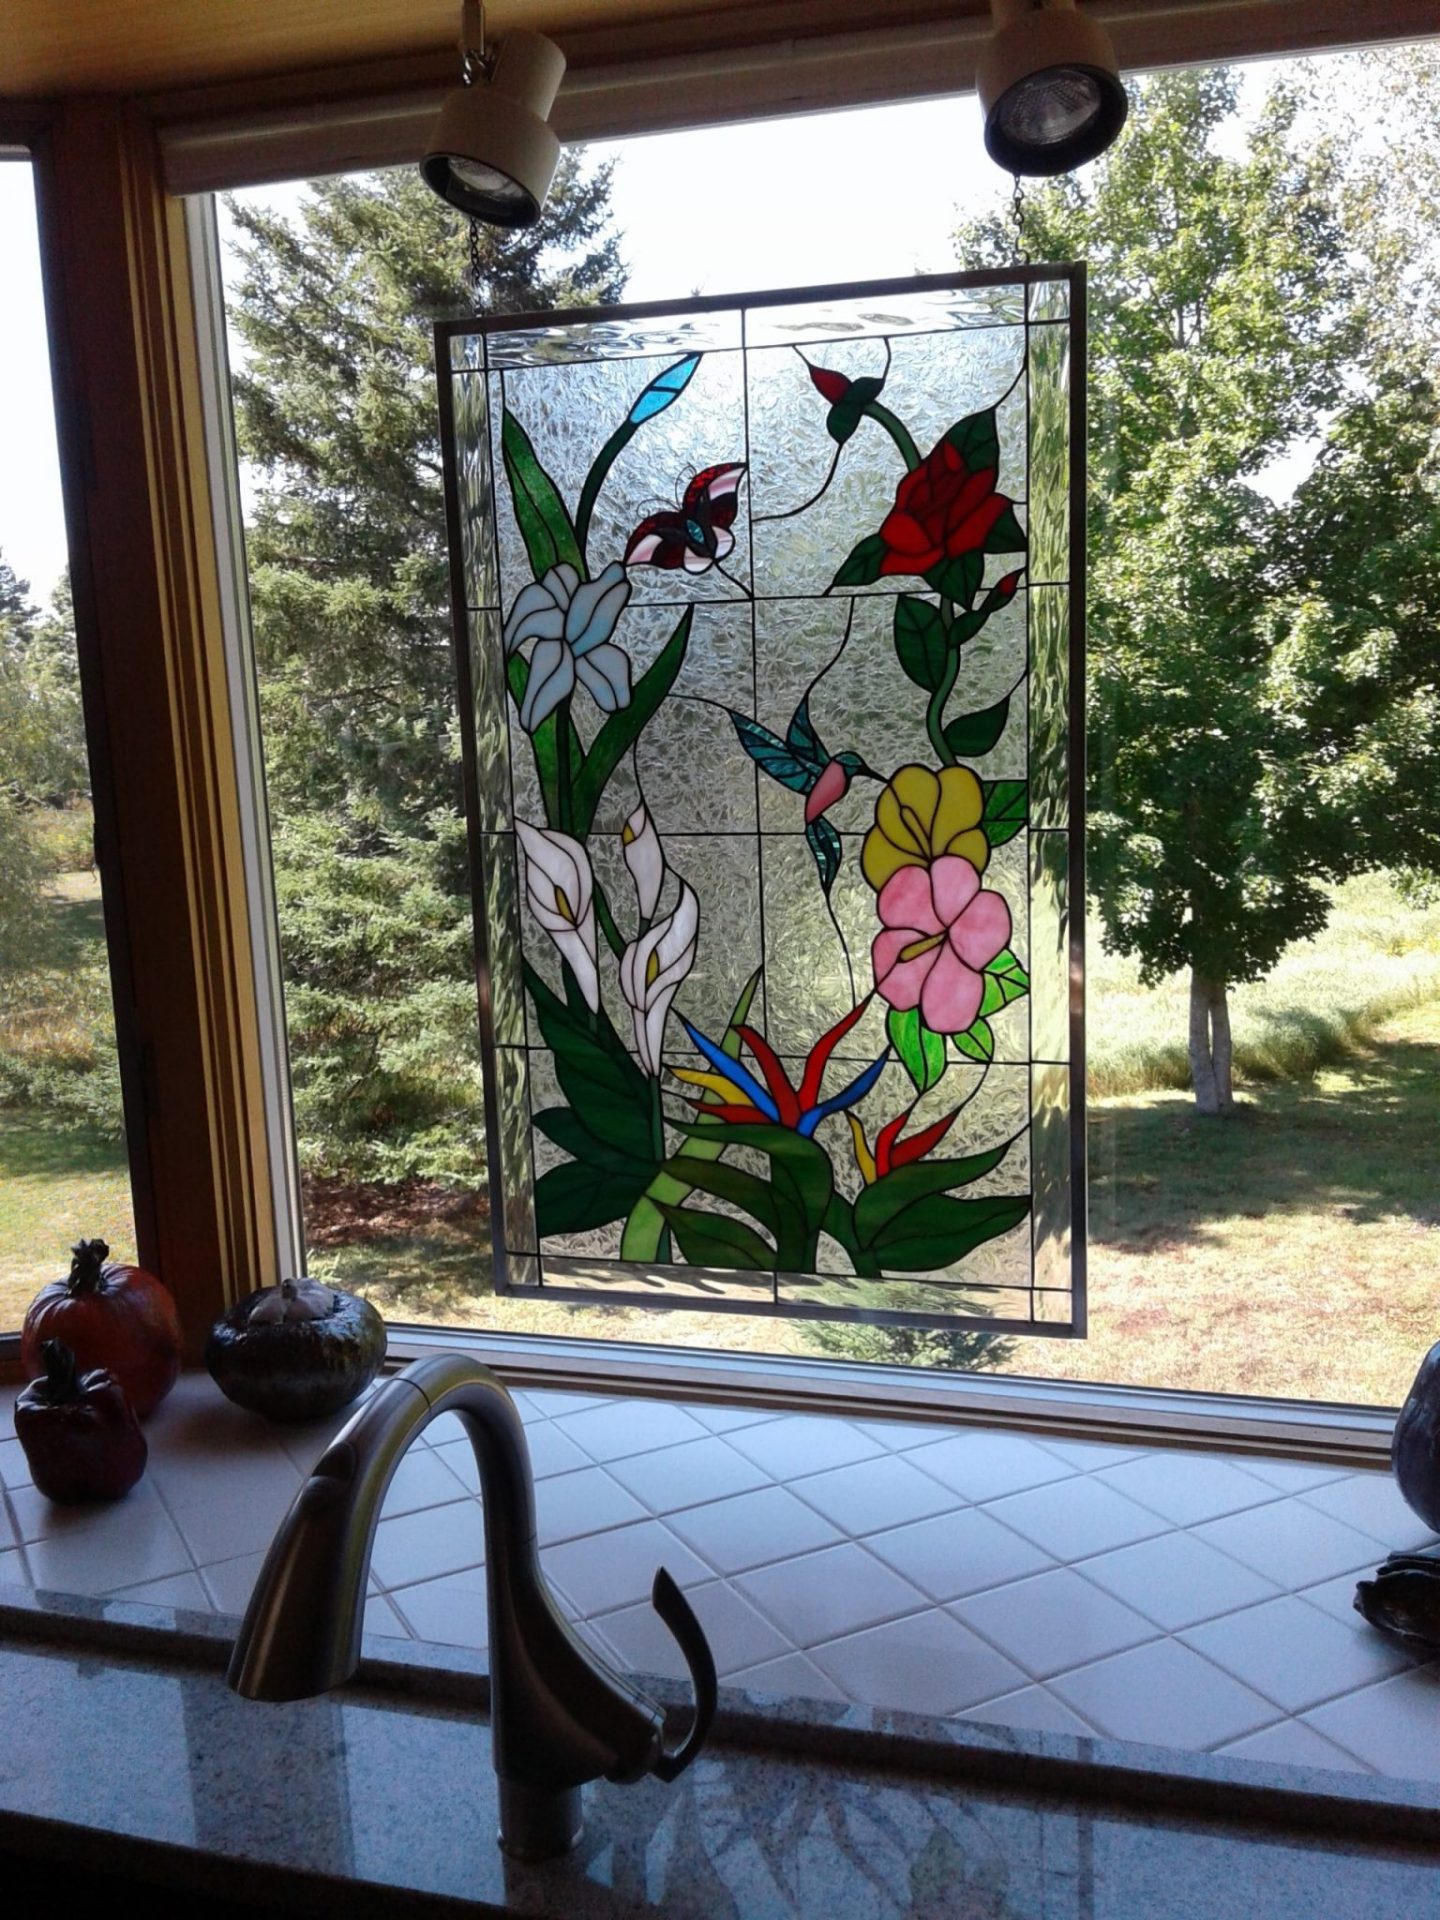 Lovely colorful hummingbirds and flowers stained glass panel hung in a kitchen window with chain